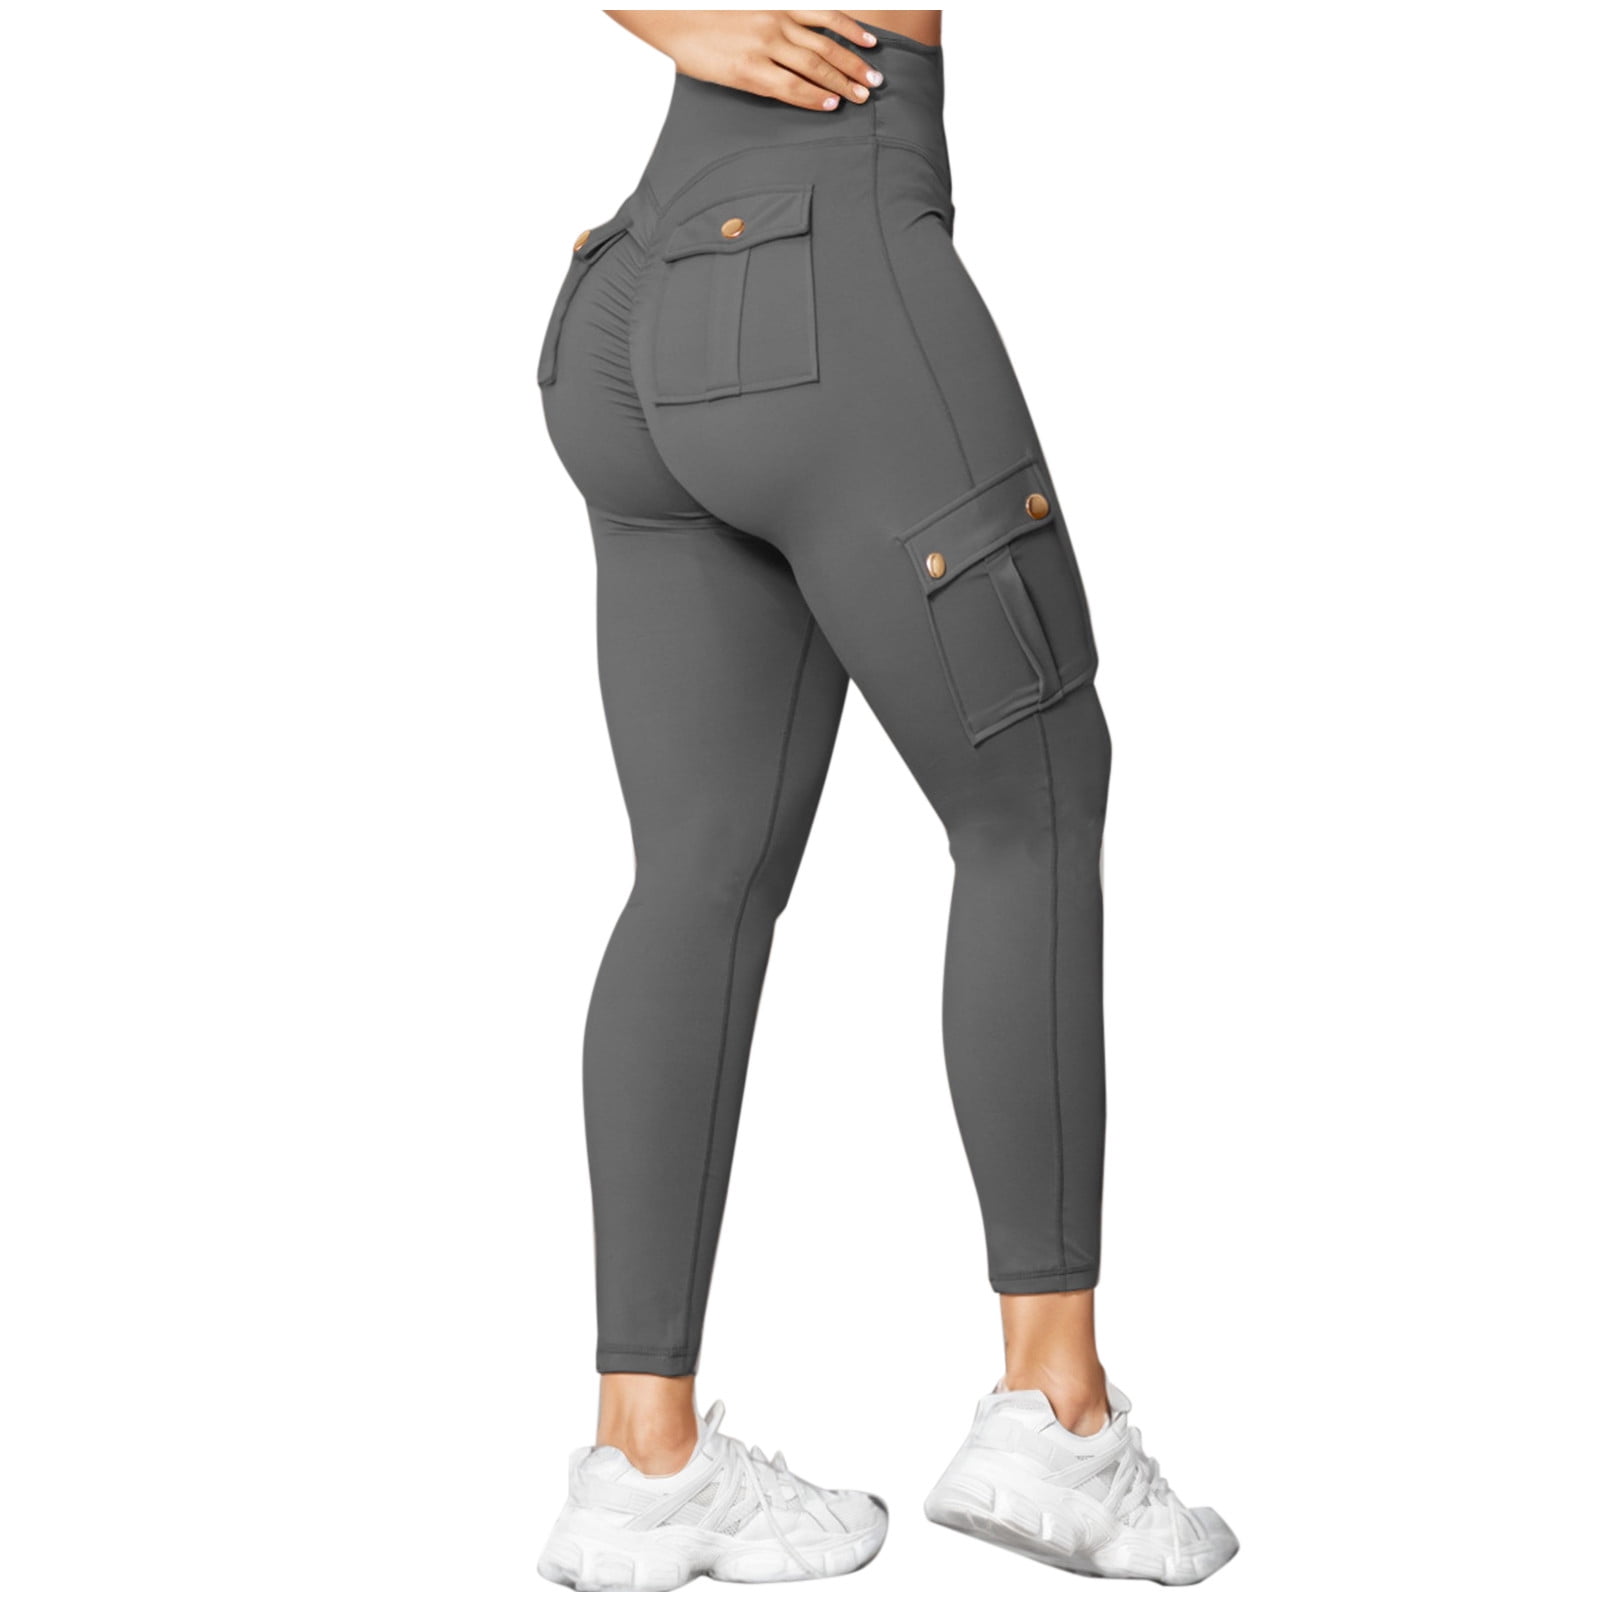 Women Fitness Push Up Leggings with Pockets Pants High Waist Workout  Leggins Candy Color Leggings Pockets S-XL 3 Colors